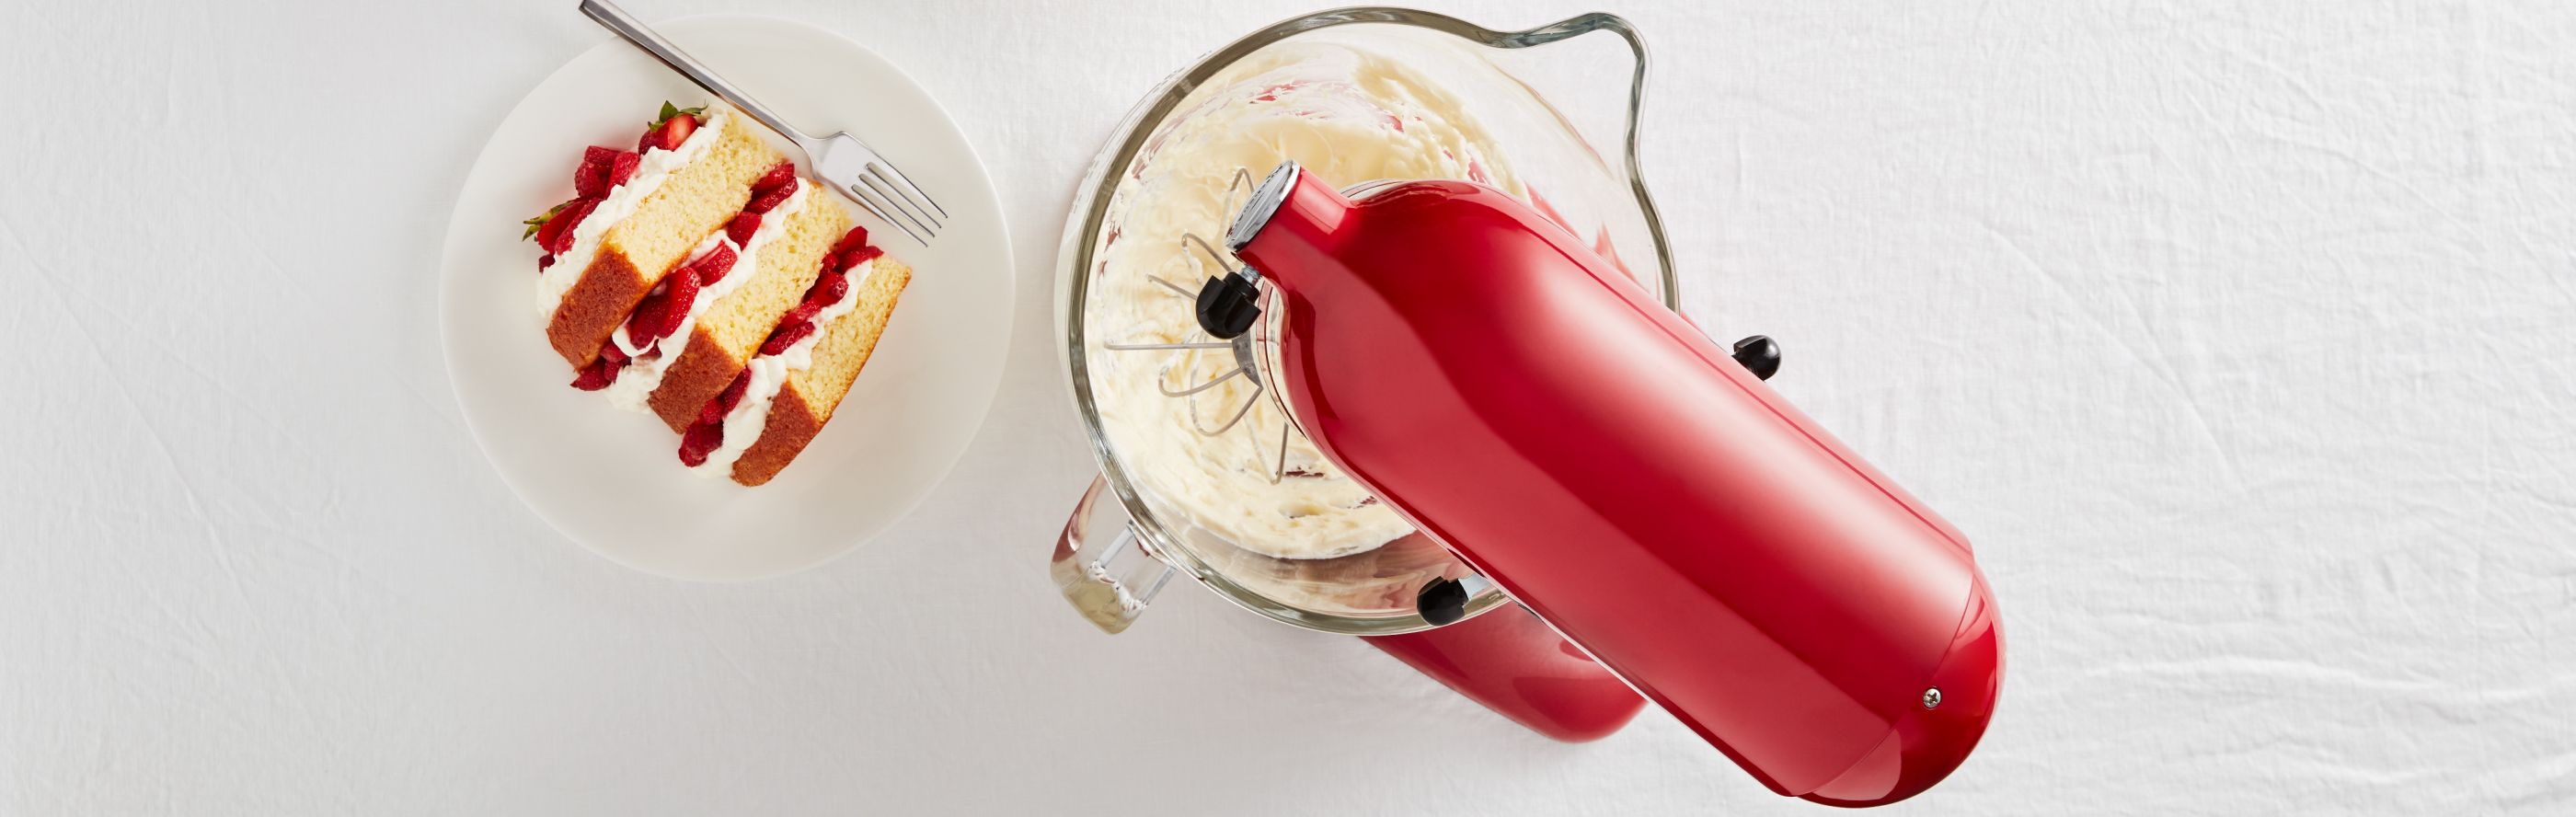 A red KitchenAid® stand mixer and a plate of strawberry shortcake.